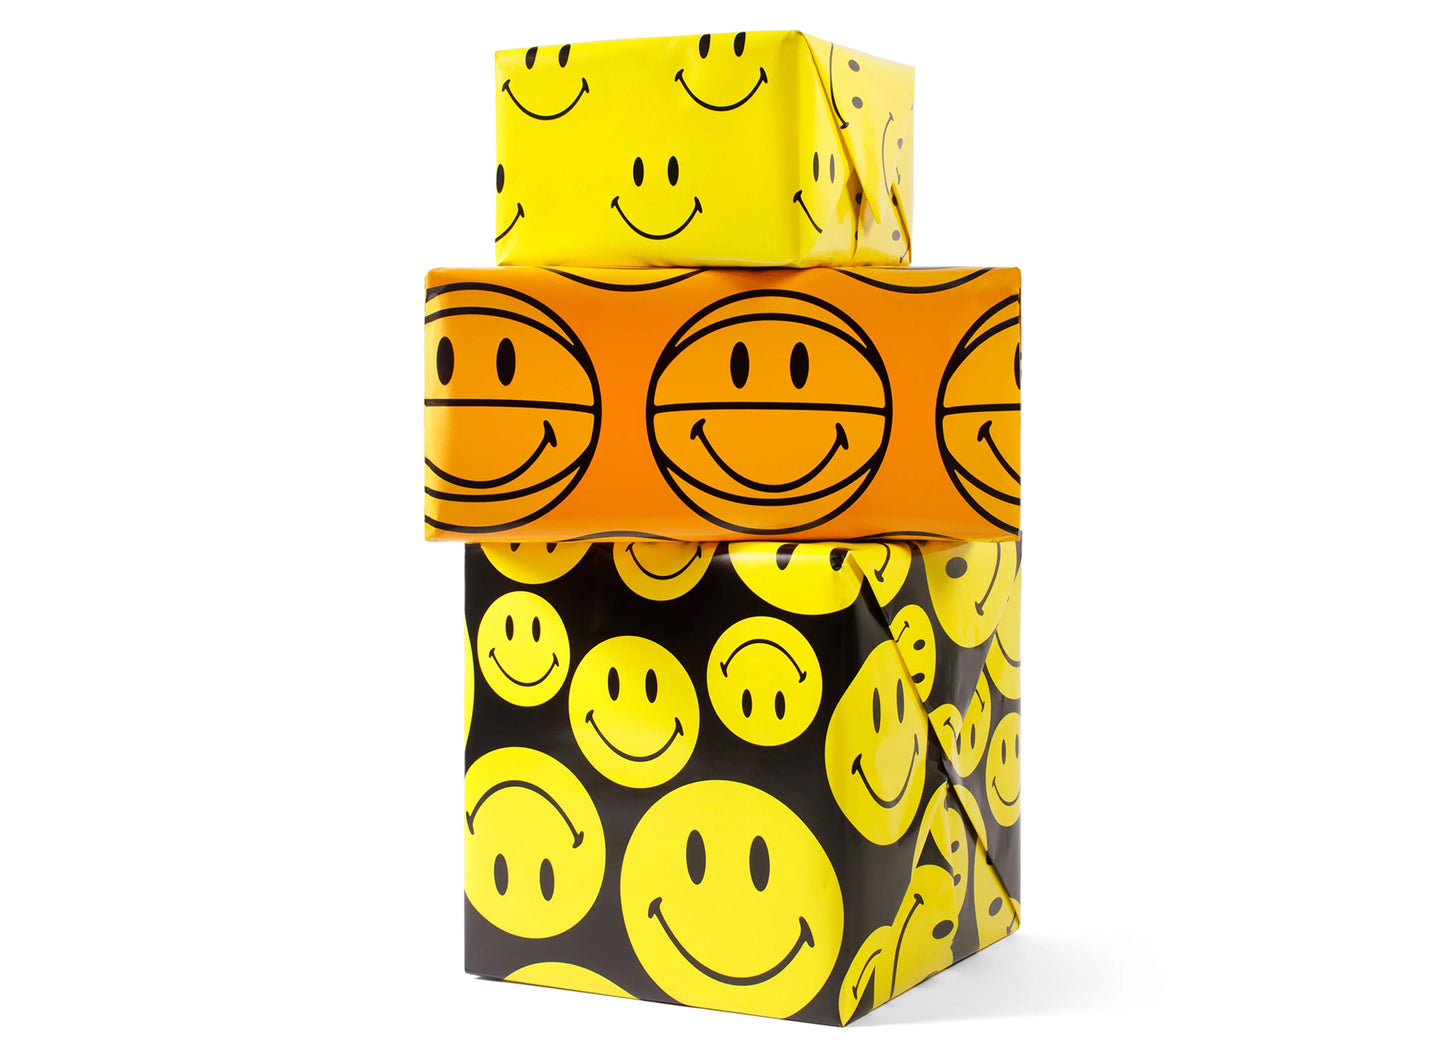 Market Smiley Gift Wrapping Paper